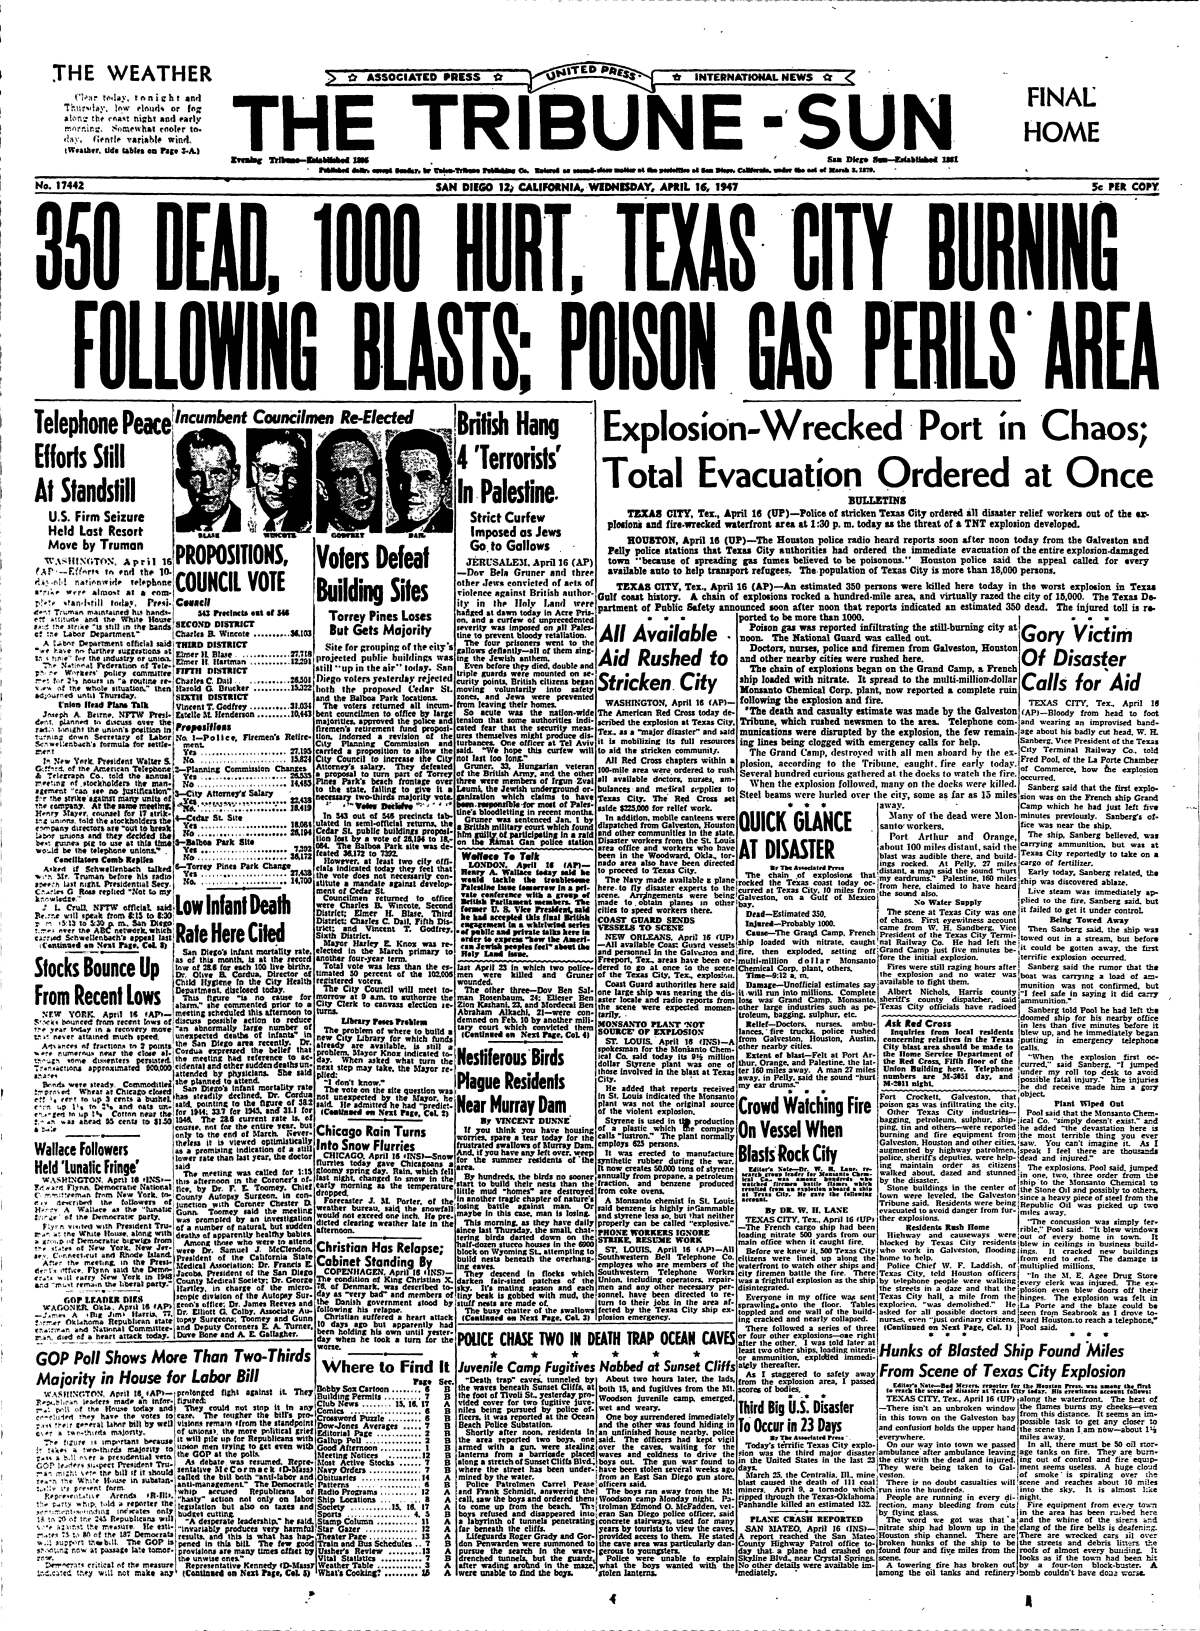 Headlines from the Texas City disaster dominate the April 16, 1947 front page of The Tribune-Sun.